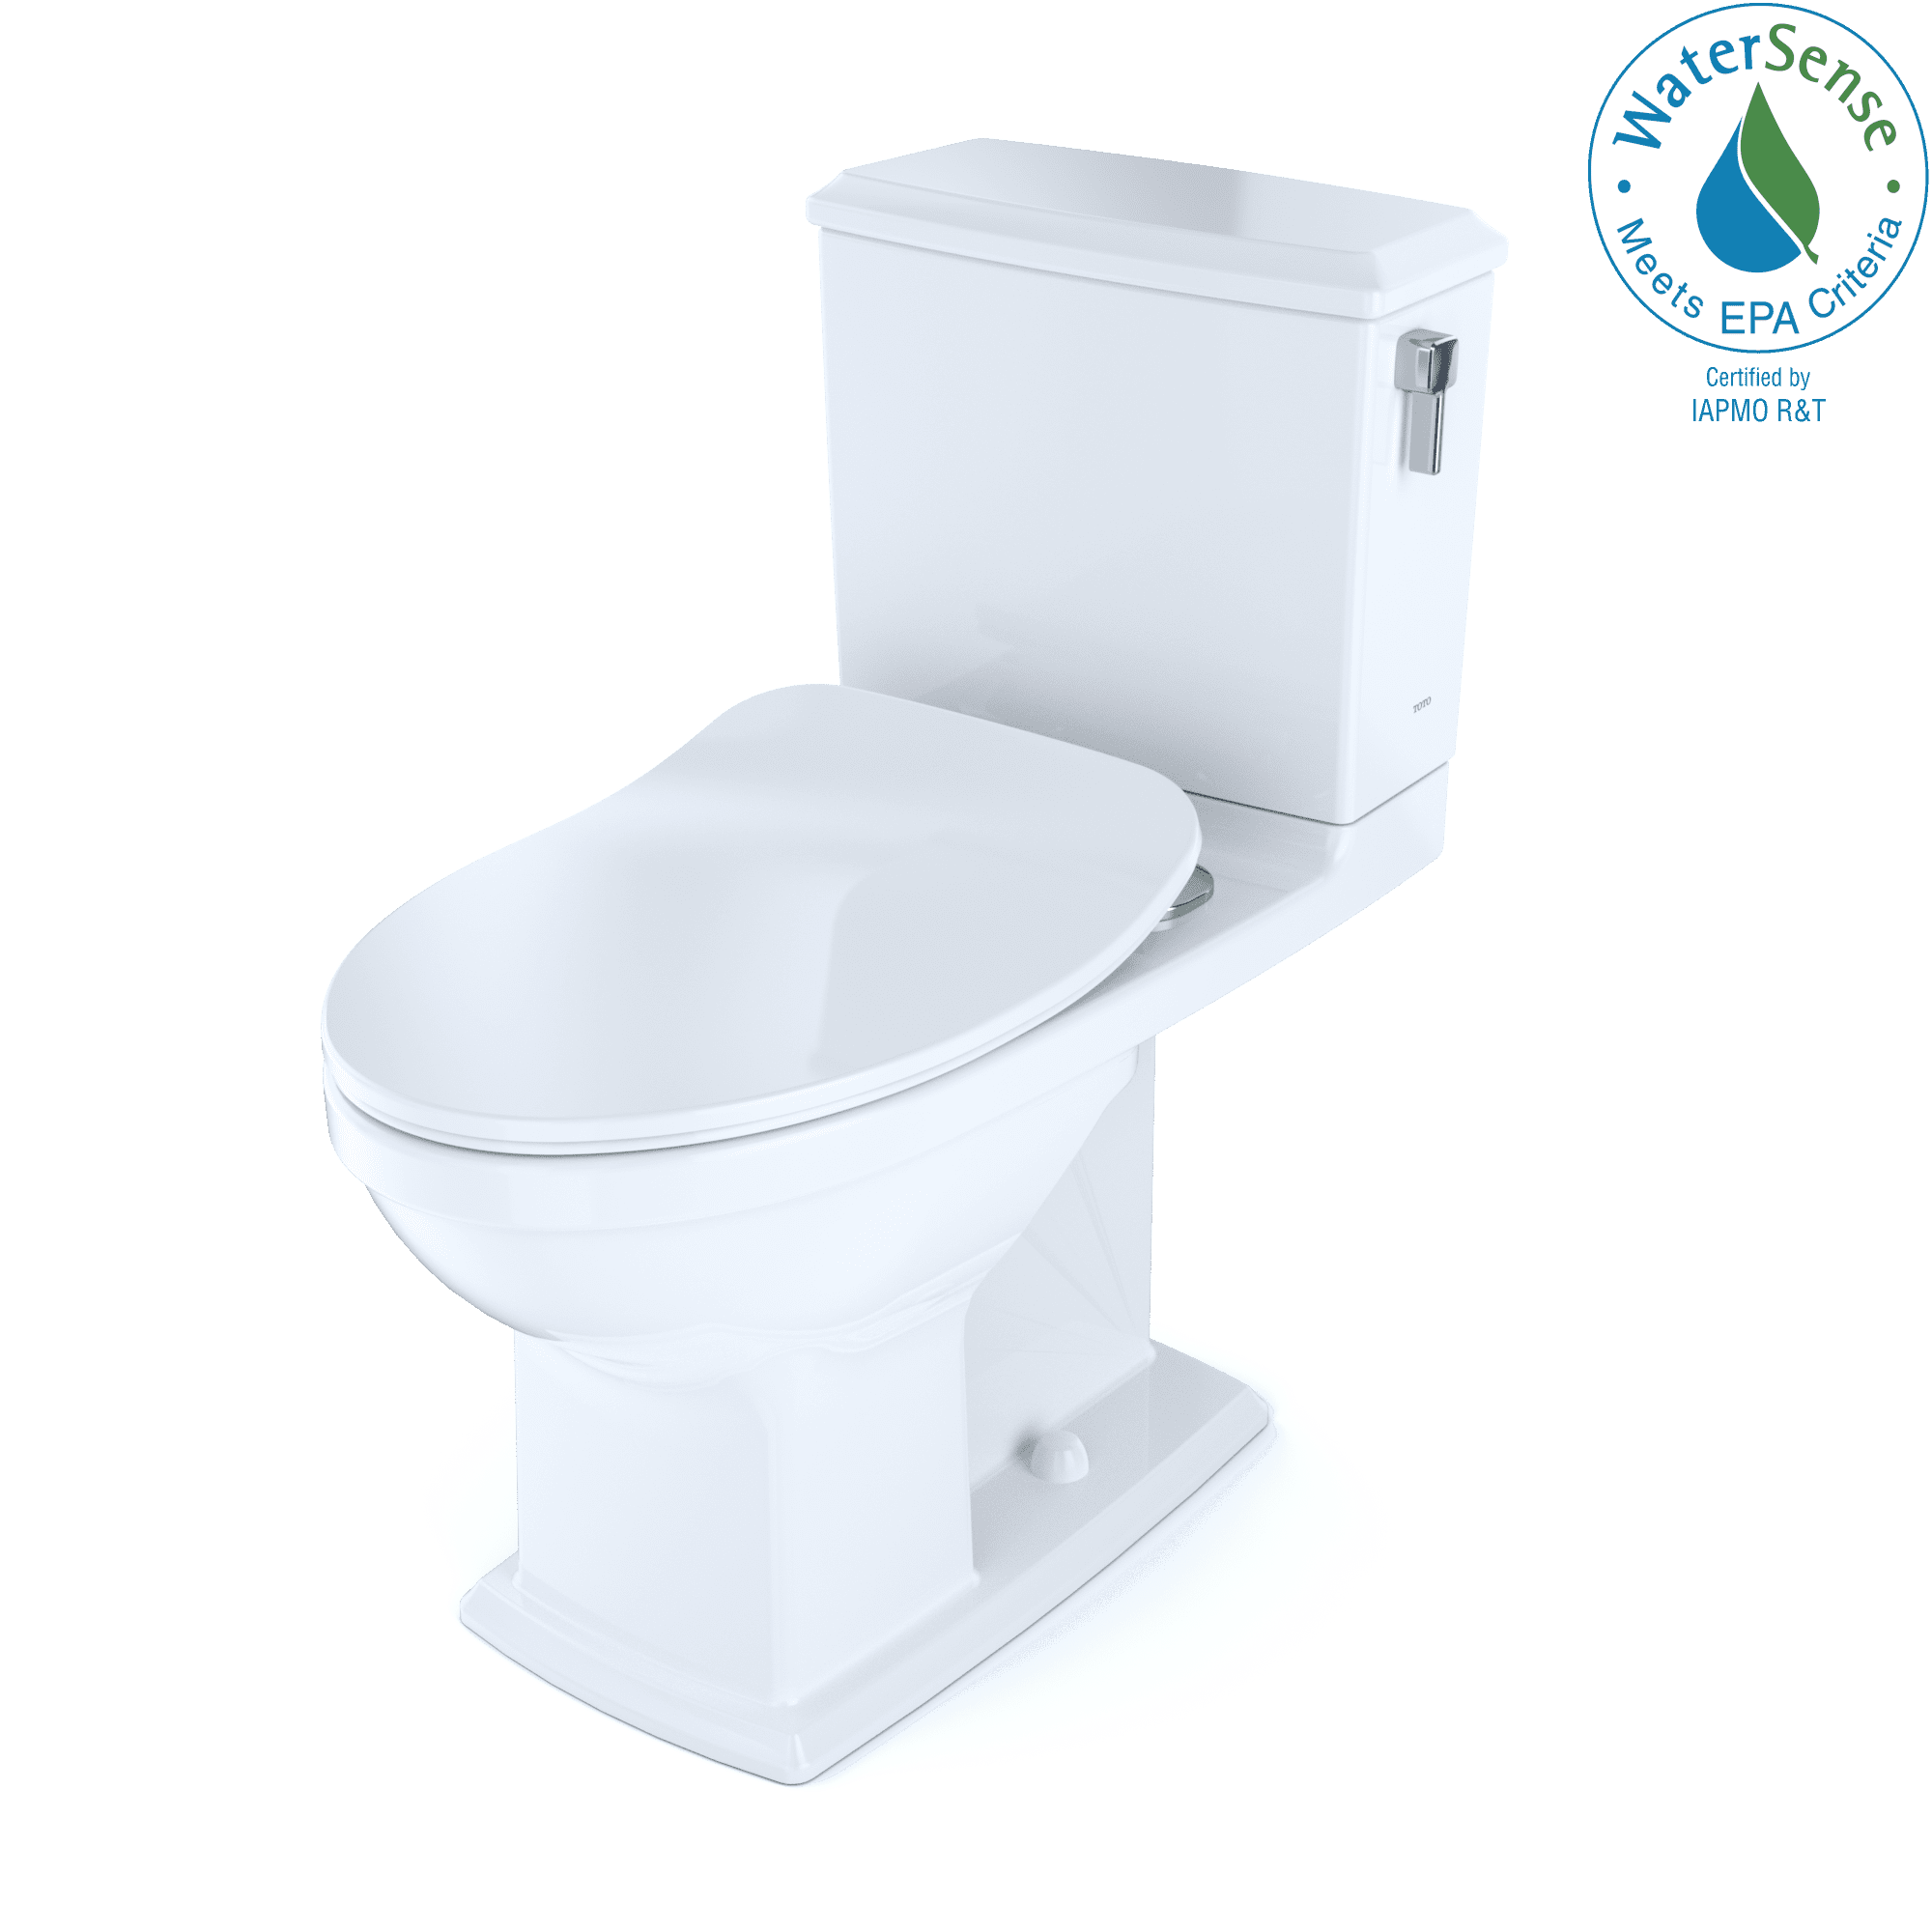 Connelly Modern Dual-Flush Elongated Toilet in White with Eco-Friendly High Efficiency